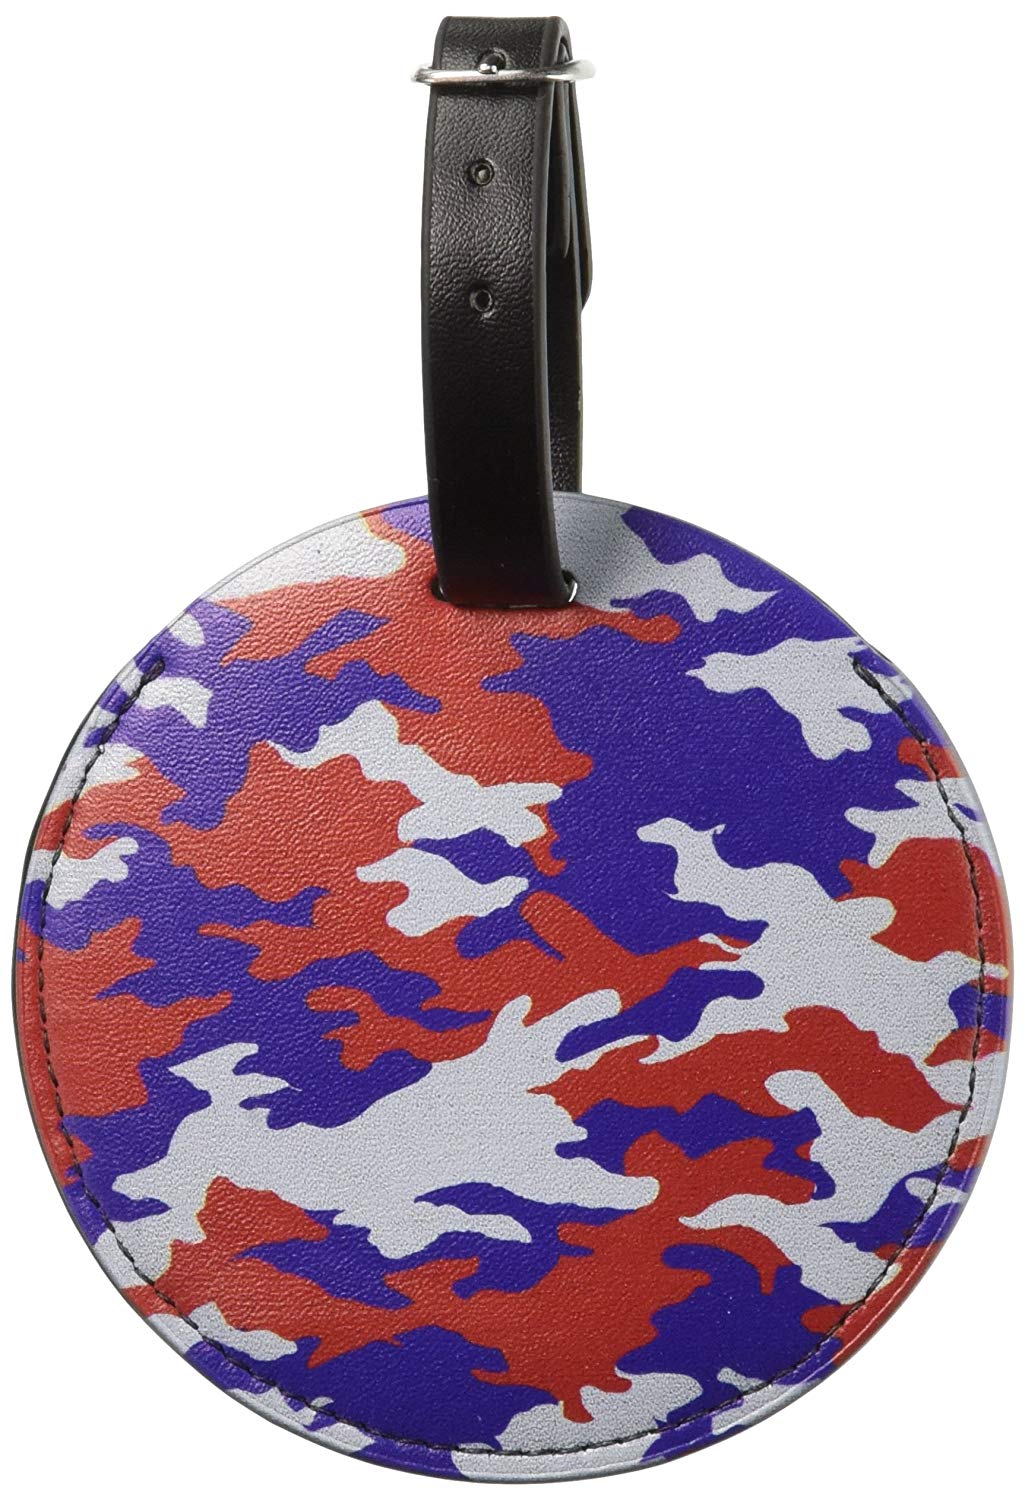 Red Black and Blue Round Logo - 50%OFF Graphics & More Camouflage Print Red White Blue Round Leather ...